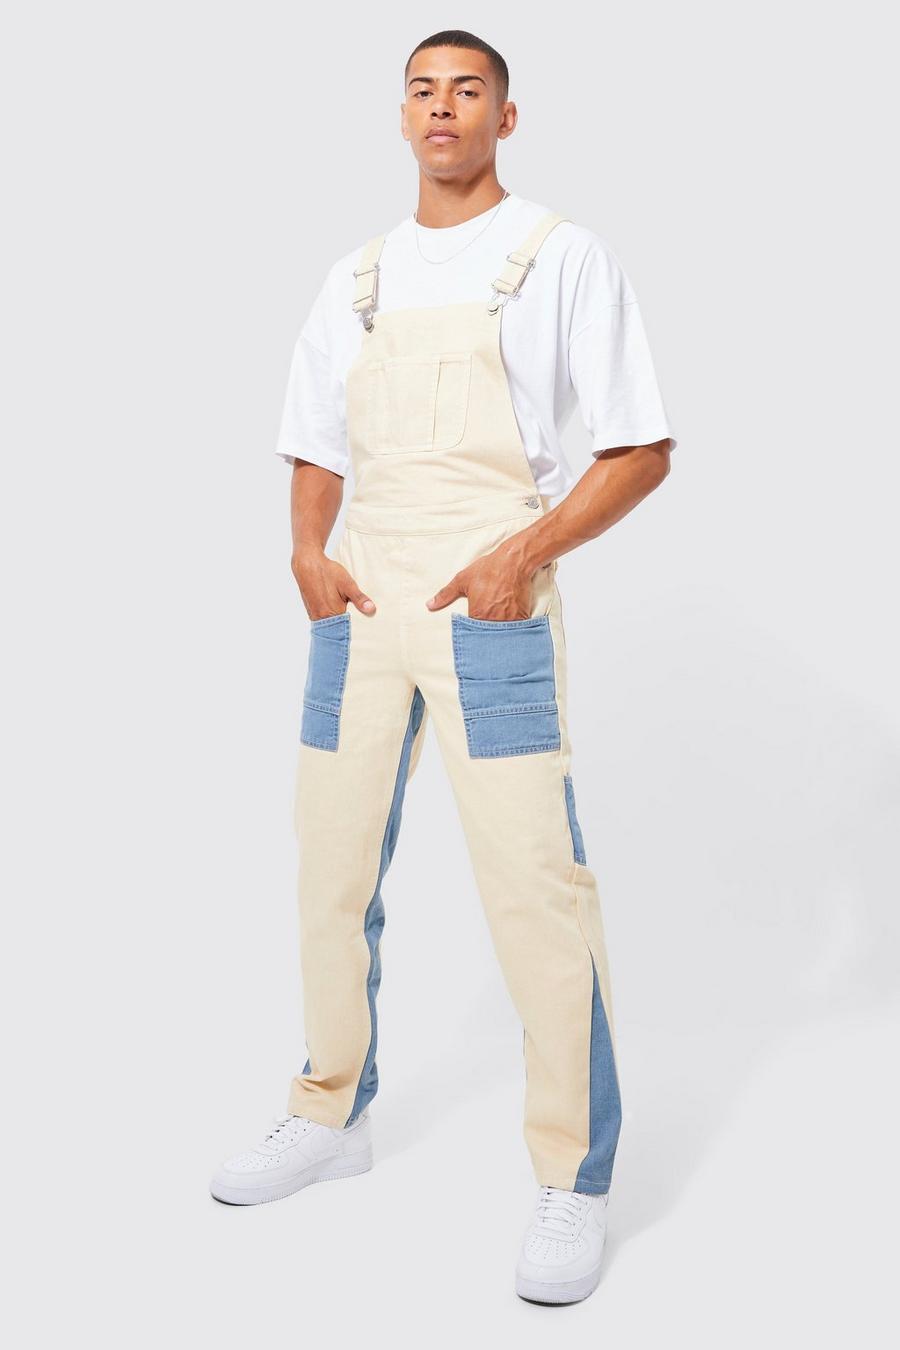 Men Overalls Jumpsuit Casual Pants Coverall Romper Trouser Performance  Clothing